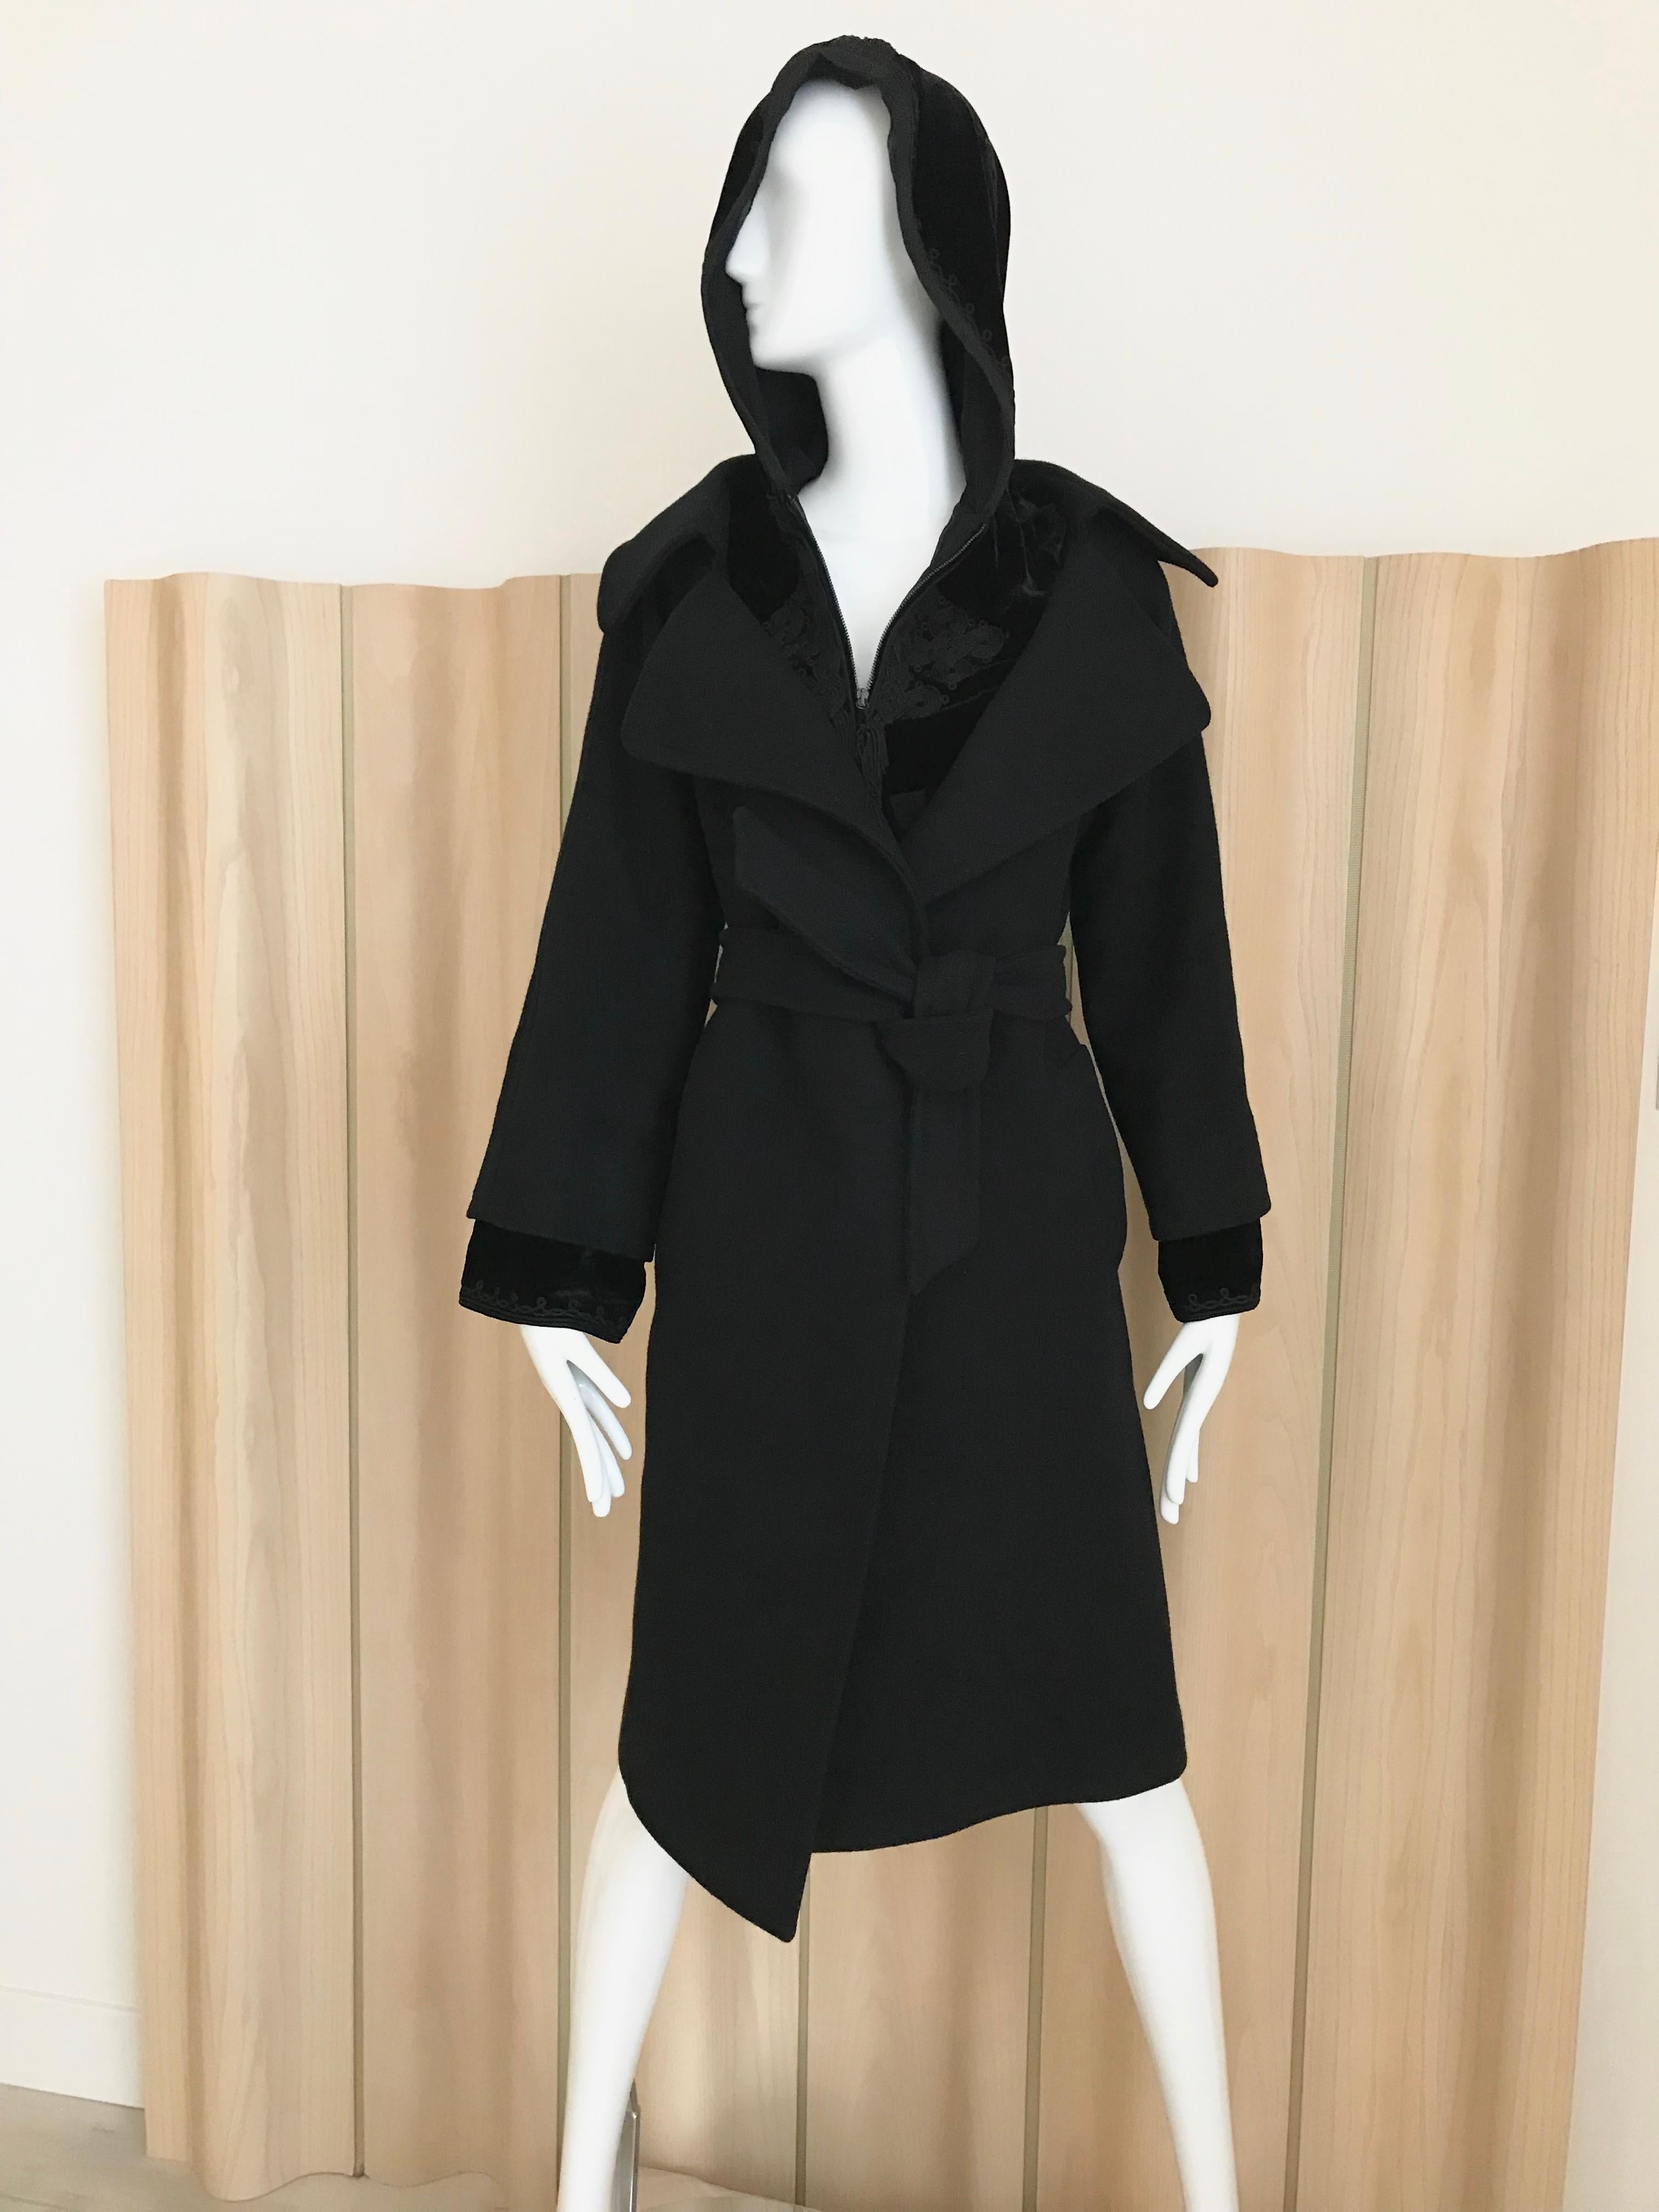 Vintage Jean Paul Gaultier Black wool coat with velvet inner layer with zipper and hood.
Fit size: Modern US 6
Bust: 38 inches/ Hip 40 inches/ Coat length 39 inches/ sleeve length: 24 inches